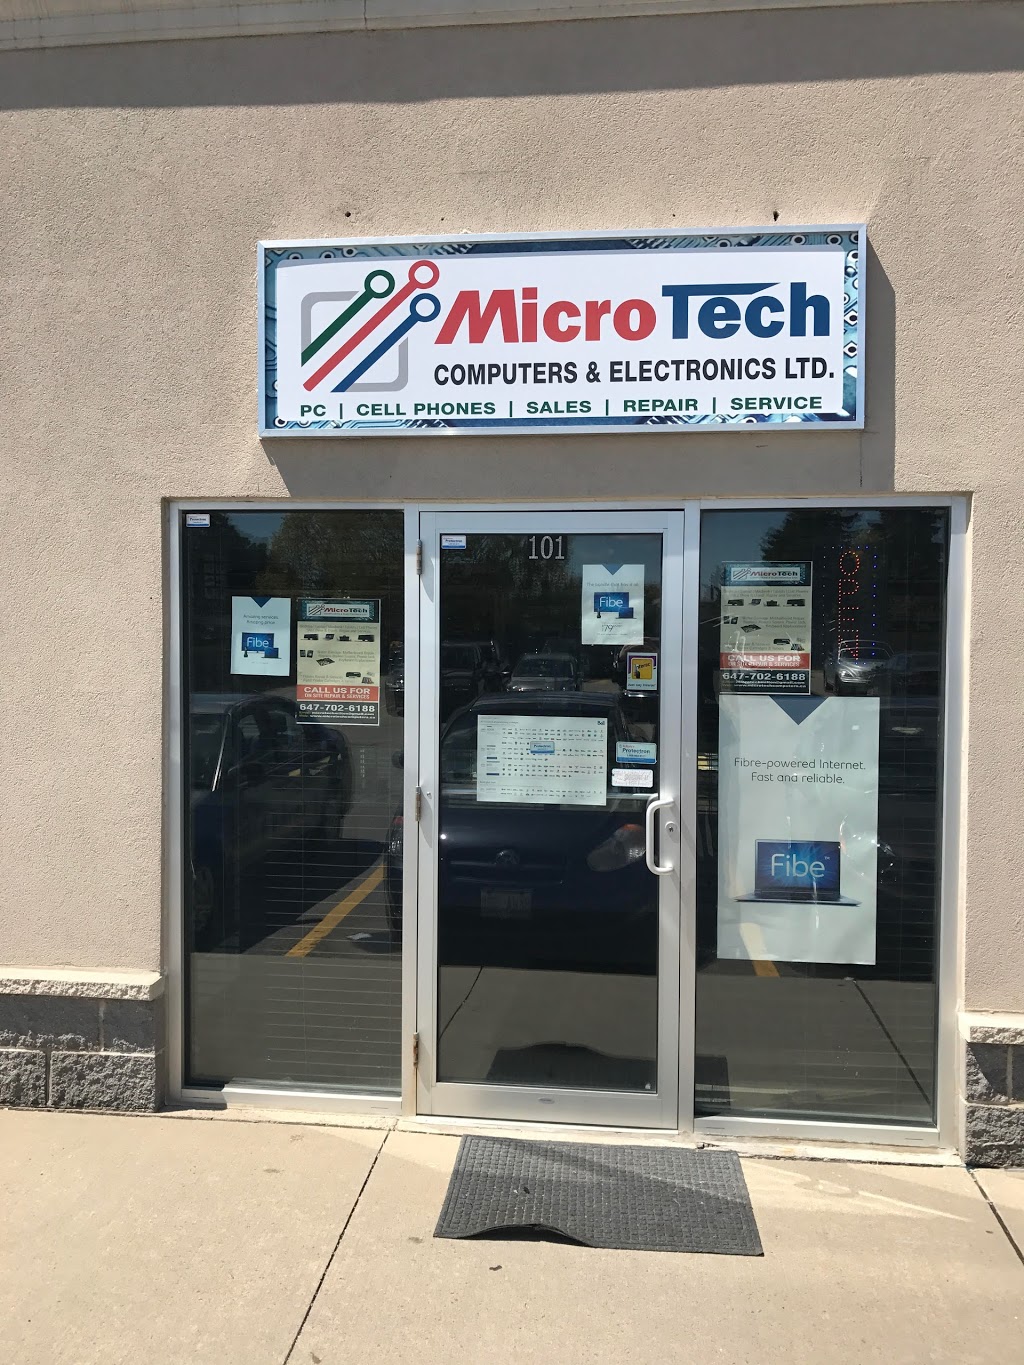 MicroTech Computers & Electronics LTD | 633 Gibson Cres, Milton, ON L9T 8Z9, Canada | Phone: (647) 702-6188